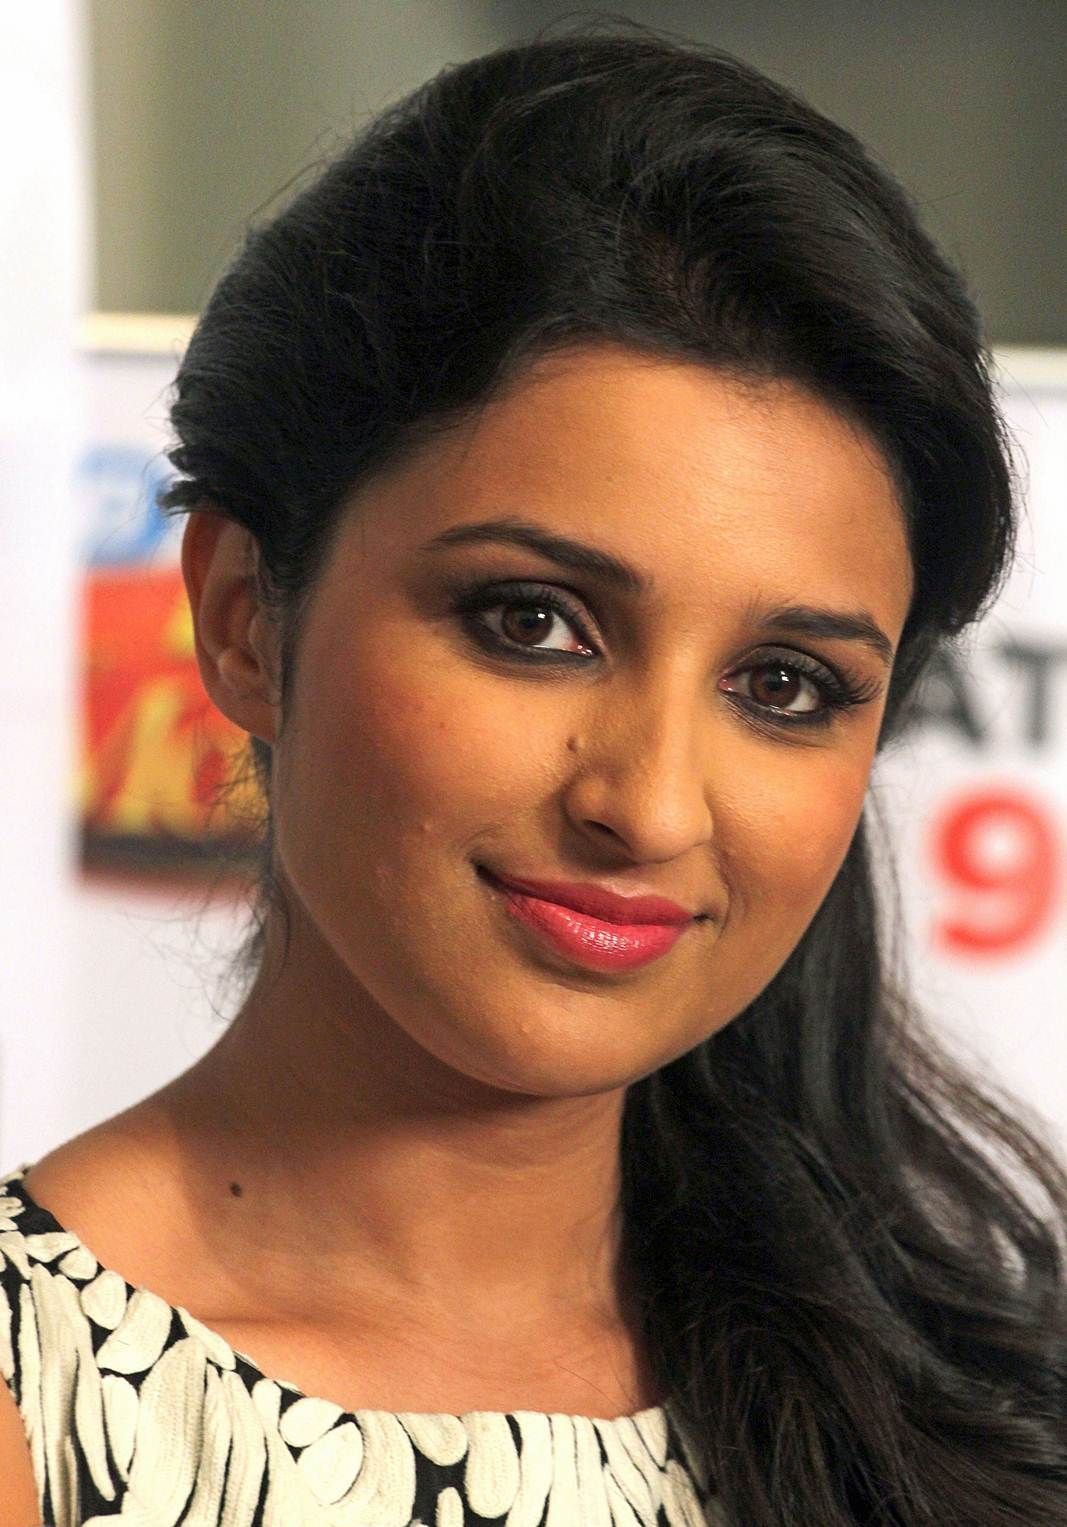 Download Free Hd Pictures/ Wallpapers Of Celebrities, - Parineeti Chopra Nose Hd , HD Wallpaper & Backgrounds